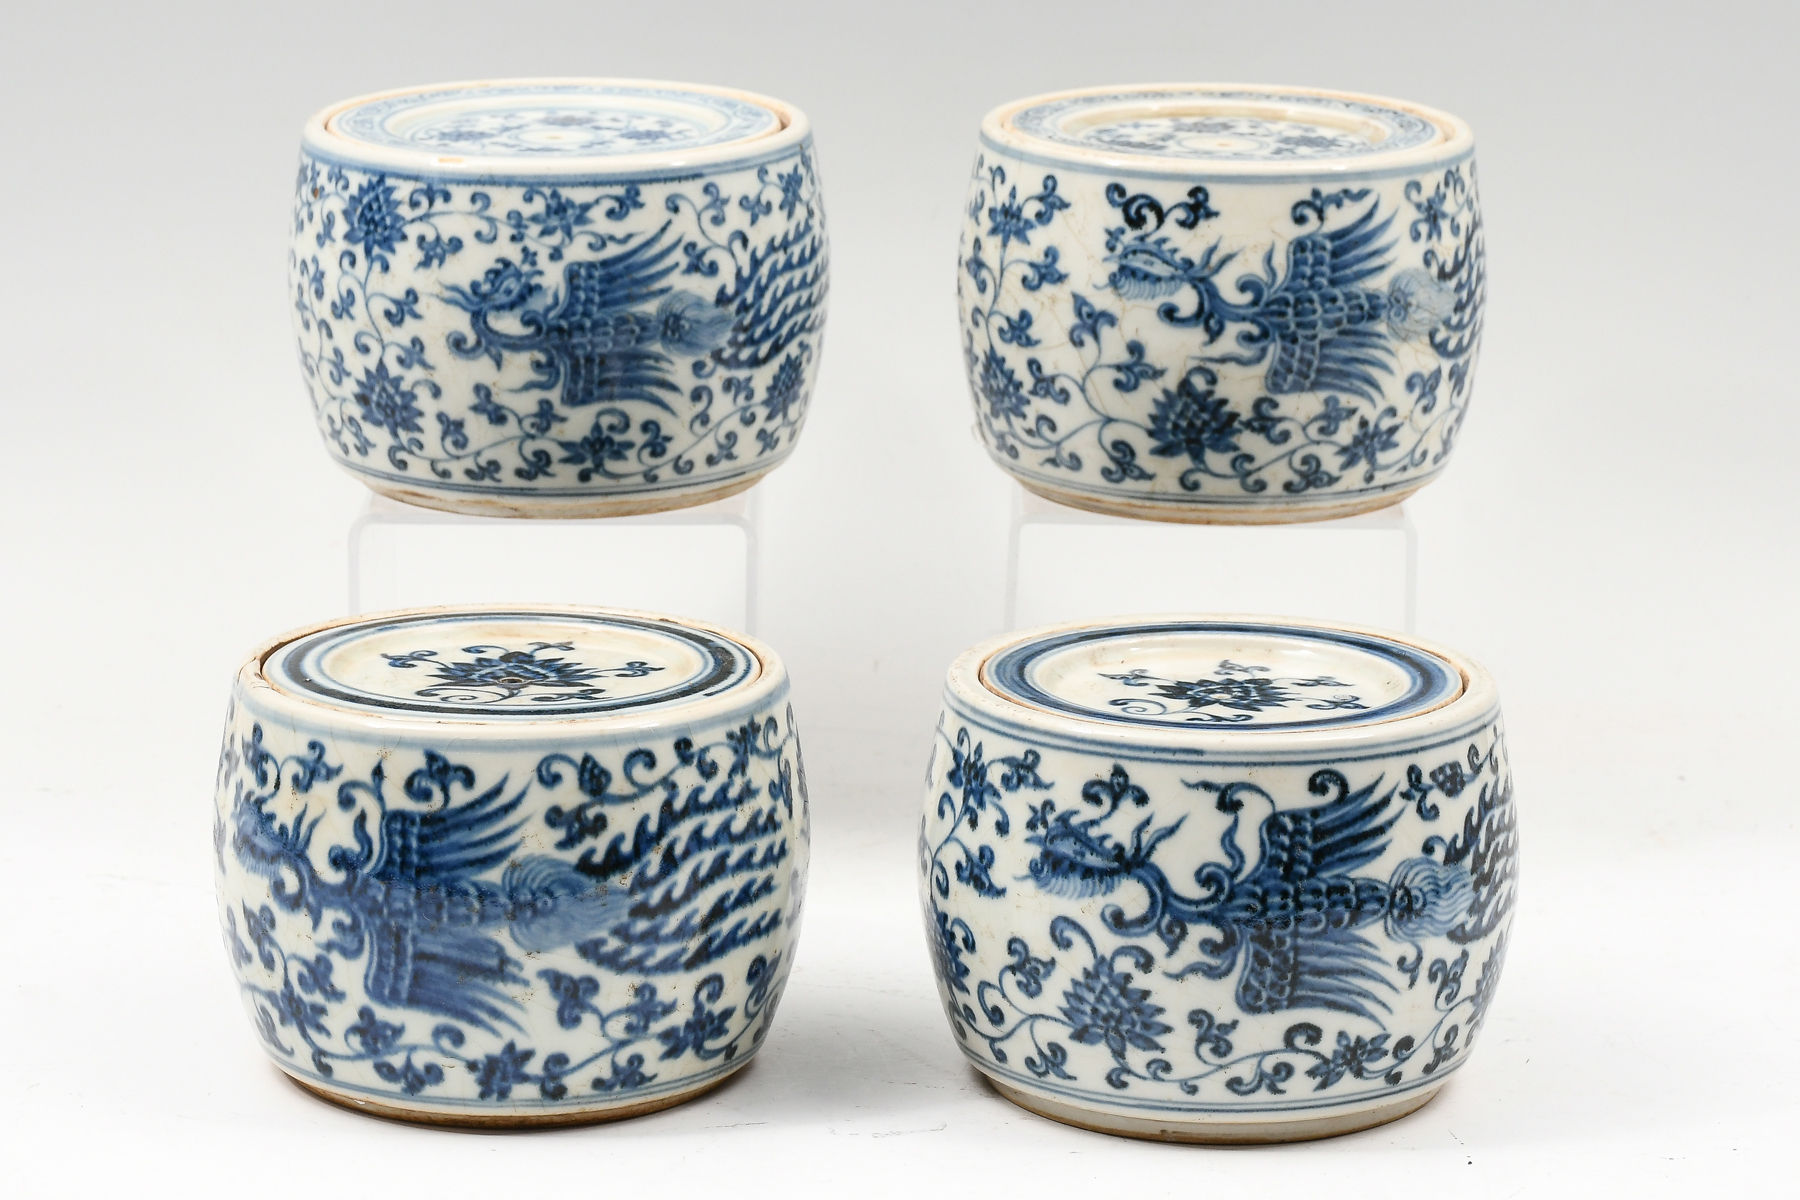 4 PIECE COVERED CHINESE PORCELAIN 30a161